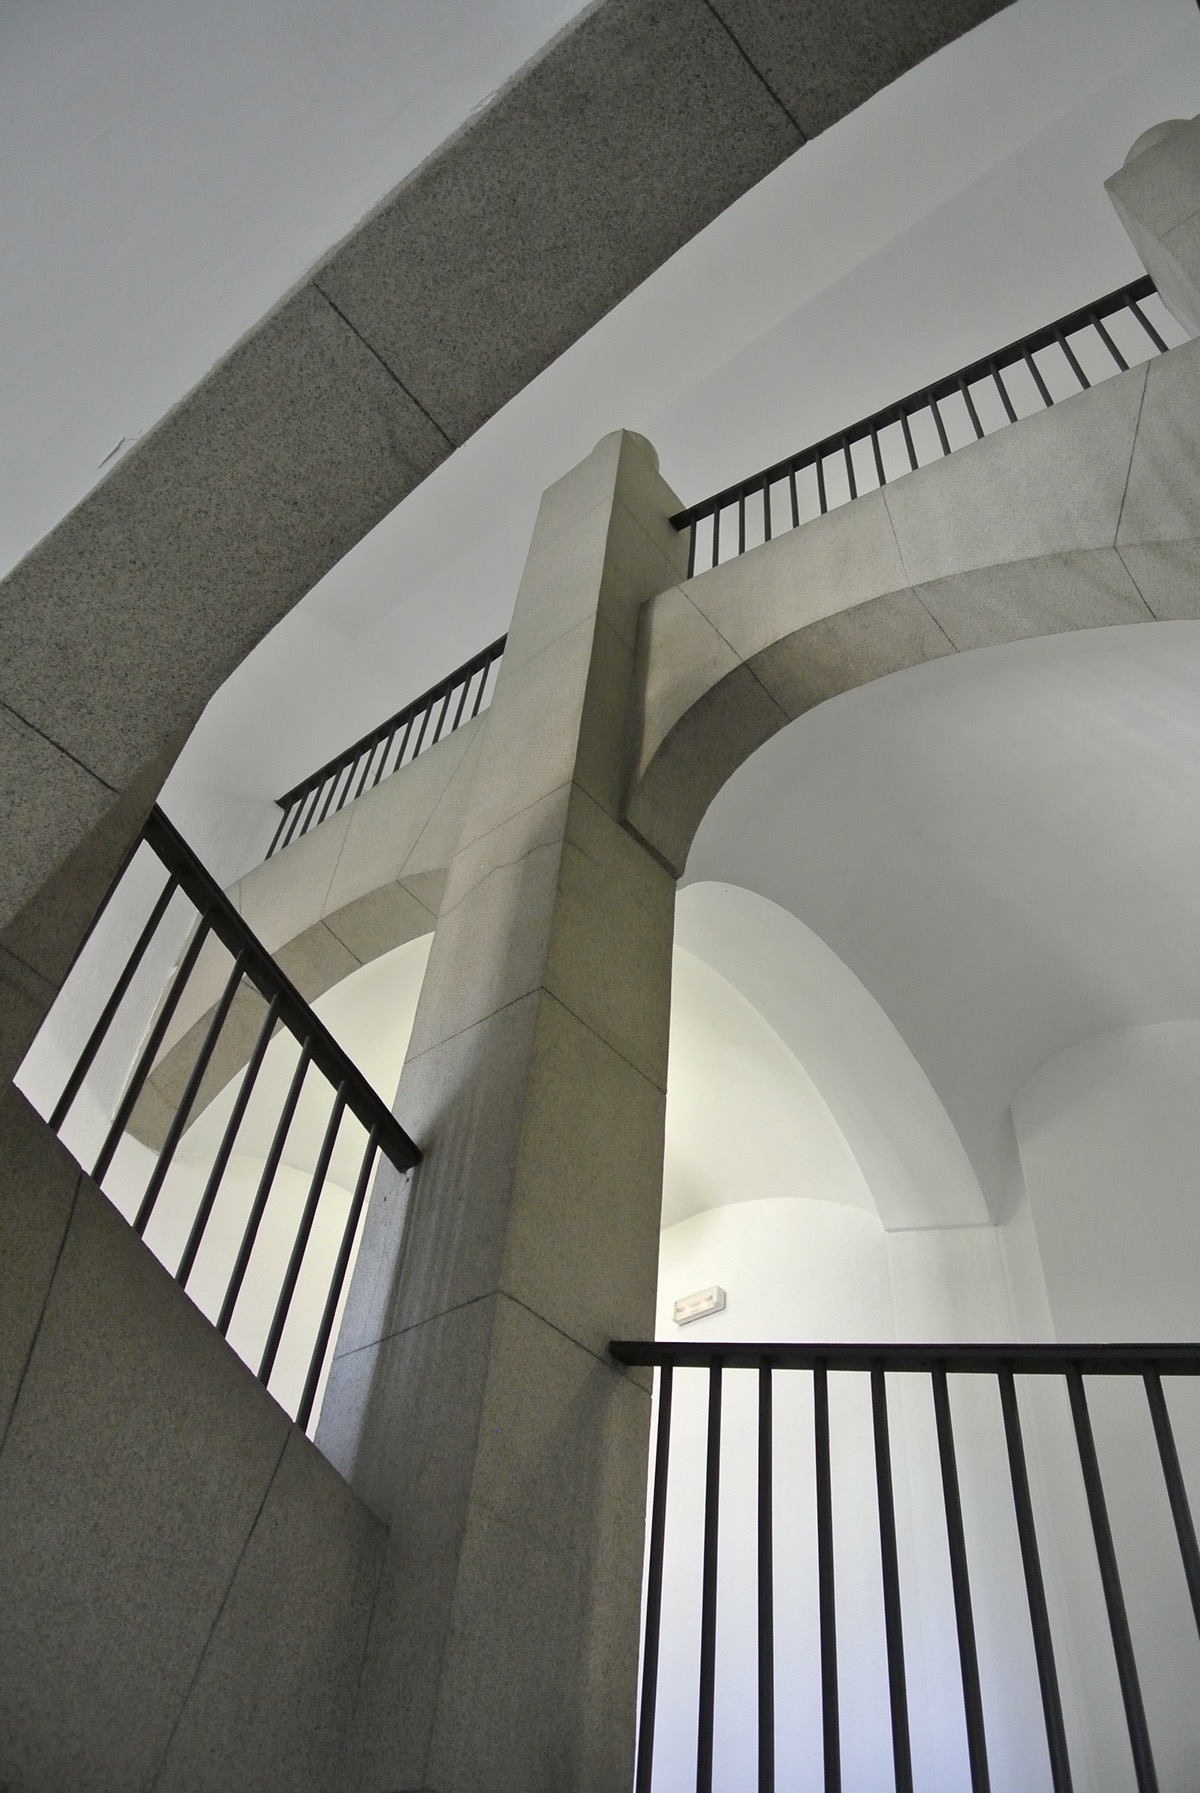 madrid stairwells archways Perspective shadow play light contrasts